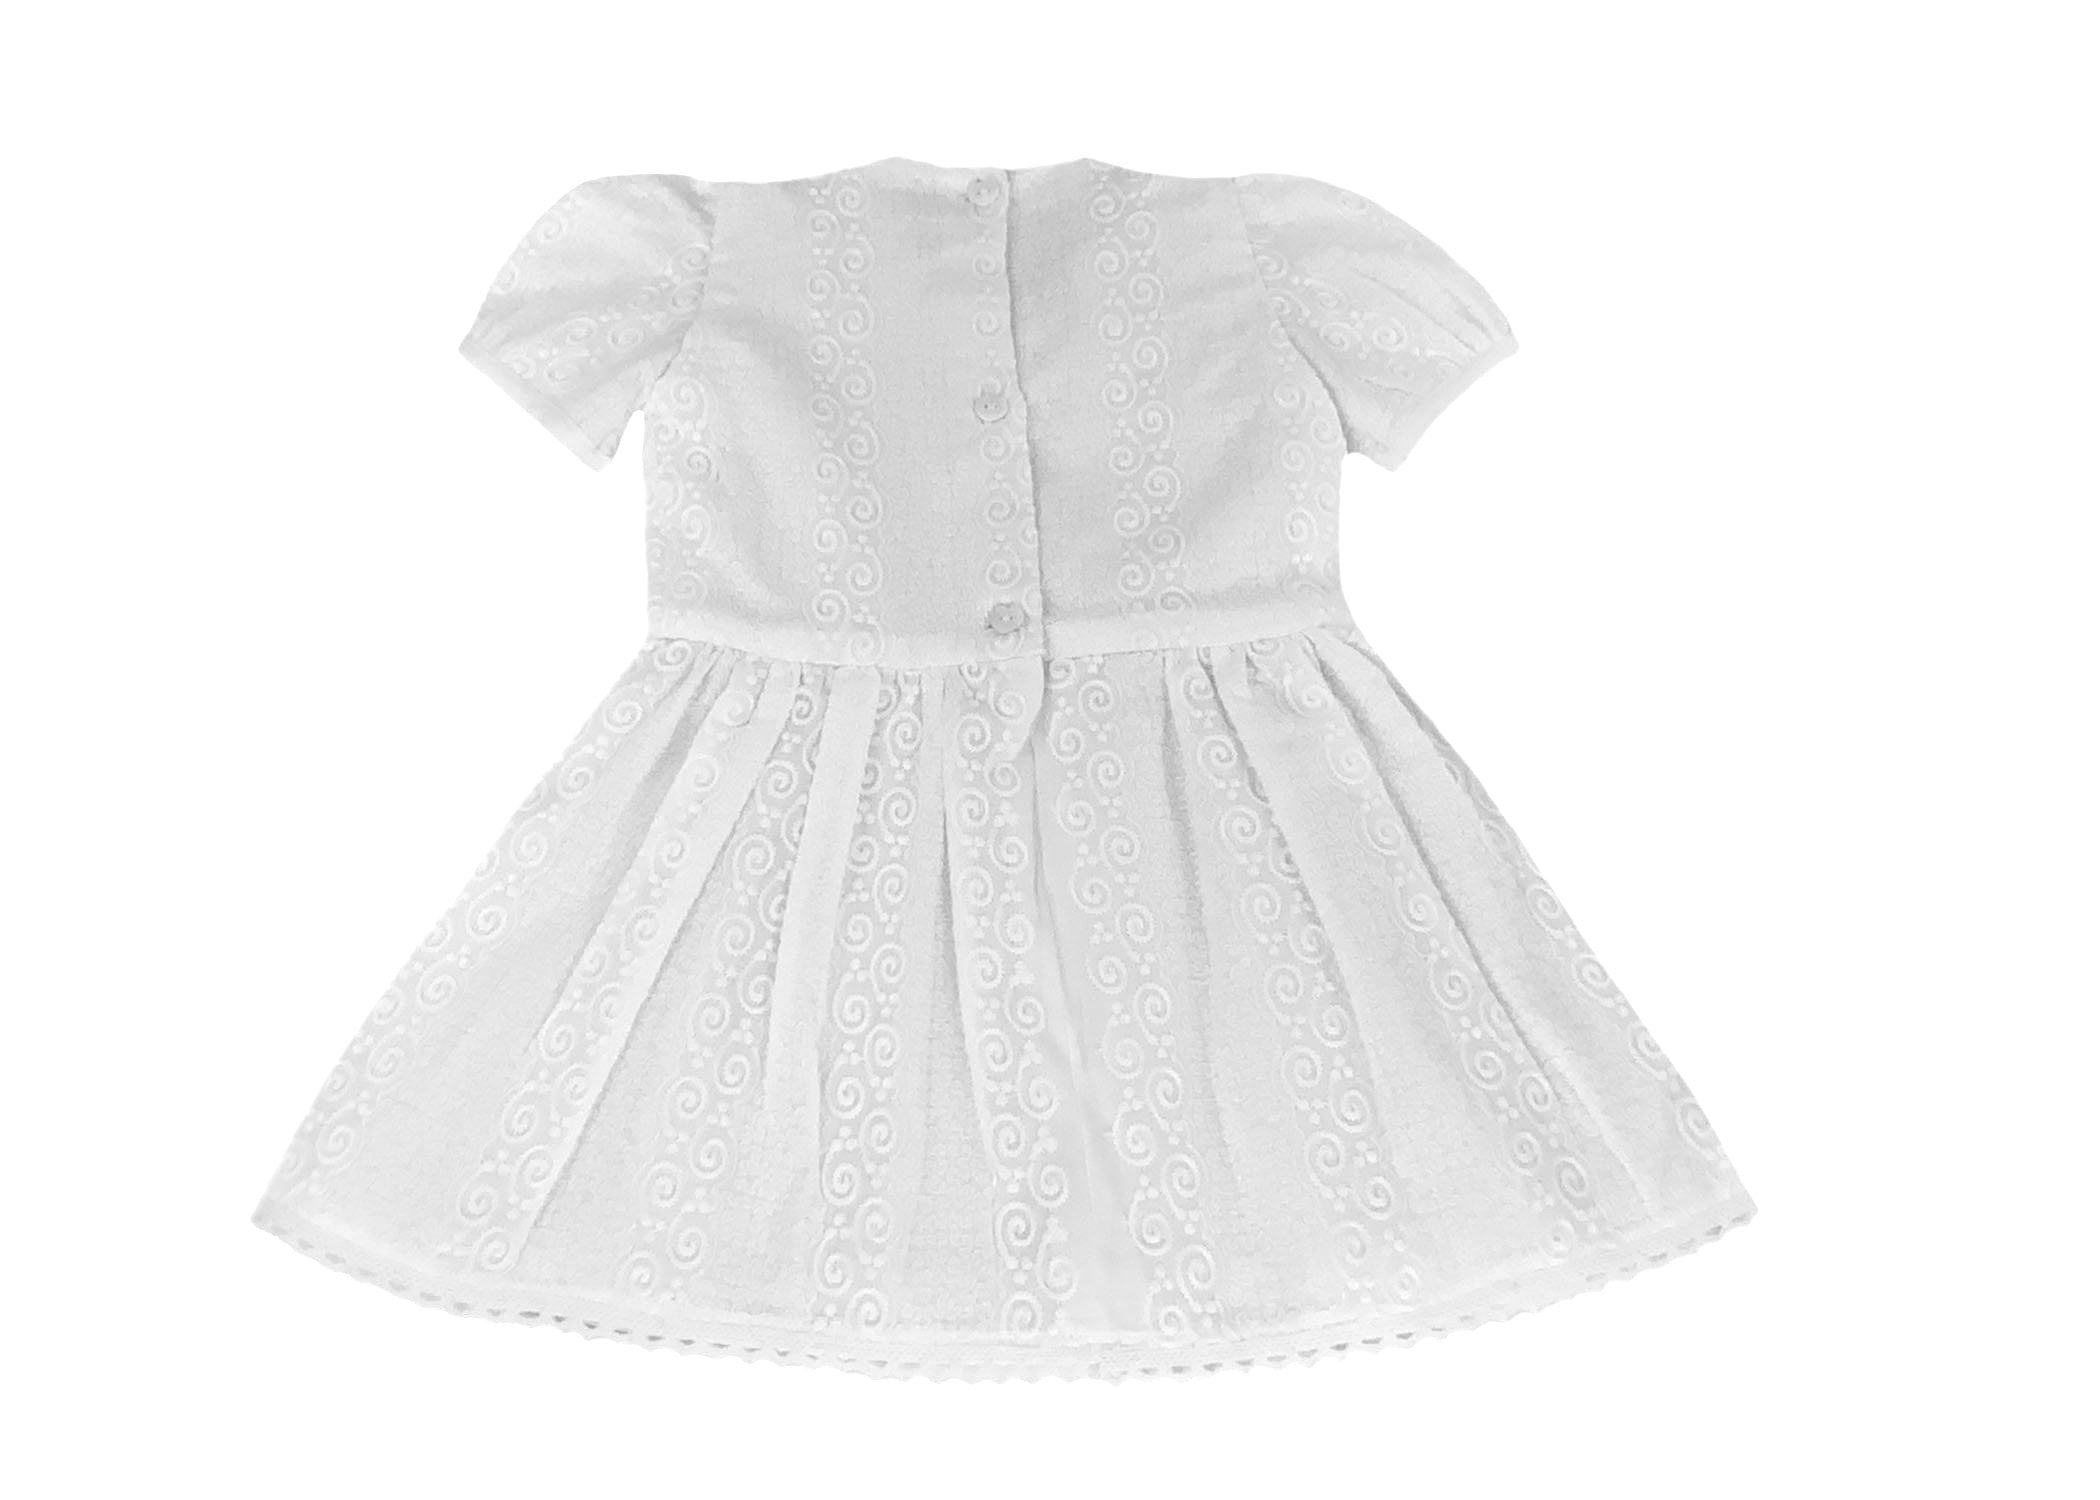 Embroidered White Cotton Puffed Sleeves Girl's Dress, Bonnet, Bloomers Set-Children Clothing Store Dress, Bloomers & Bonnet Alfa Baby Boutique 